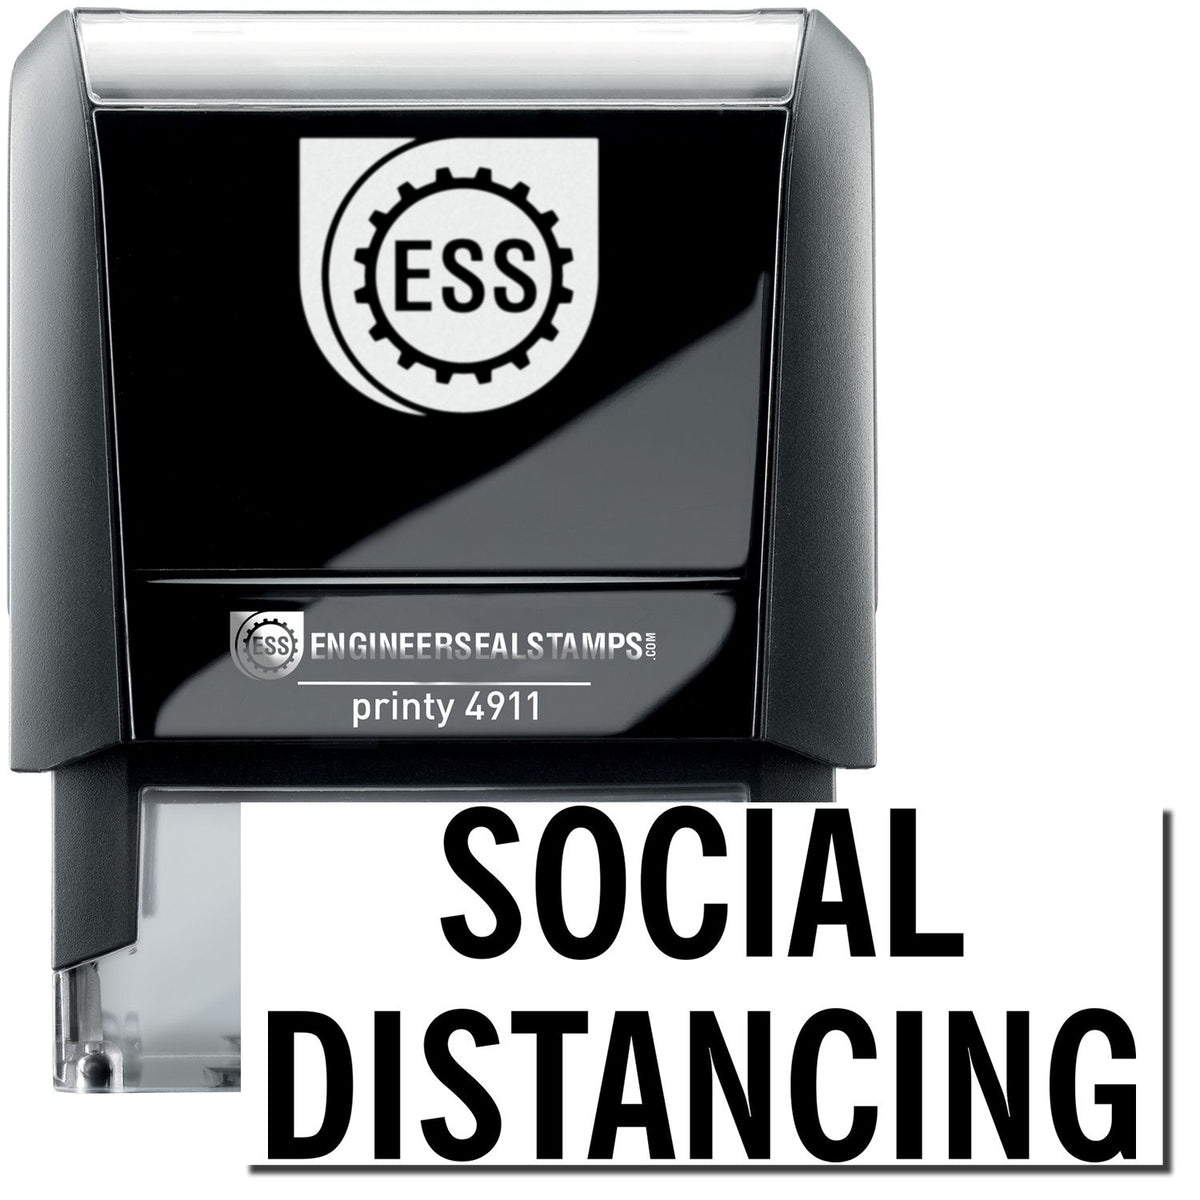 A self-inking stamp with a stamped image showing how the text &quot;SOCIAL DISTANCING&quot; is displayed after stamping.